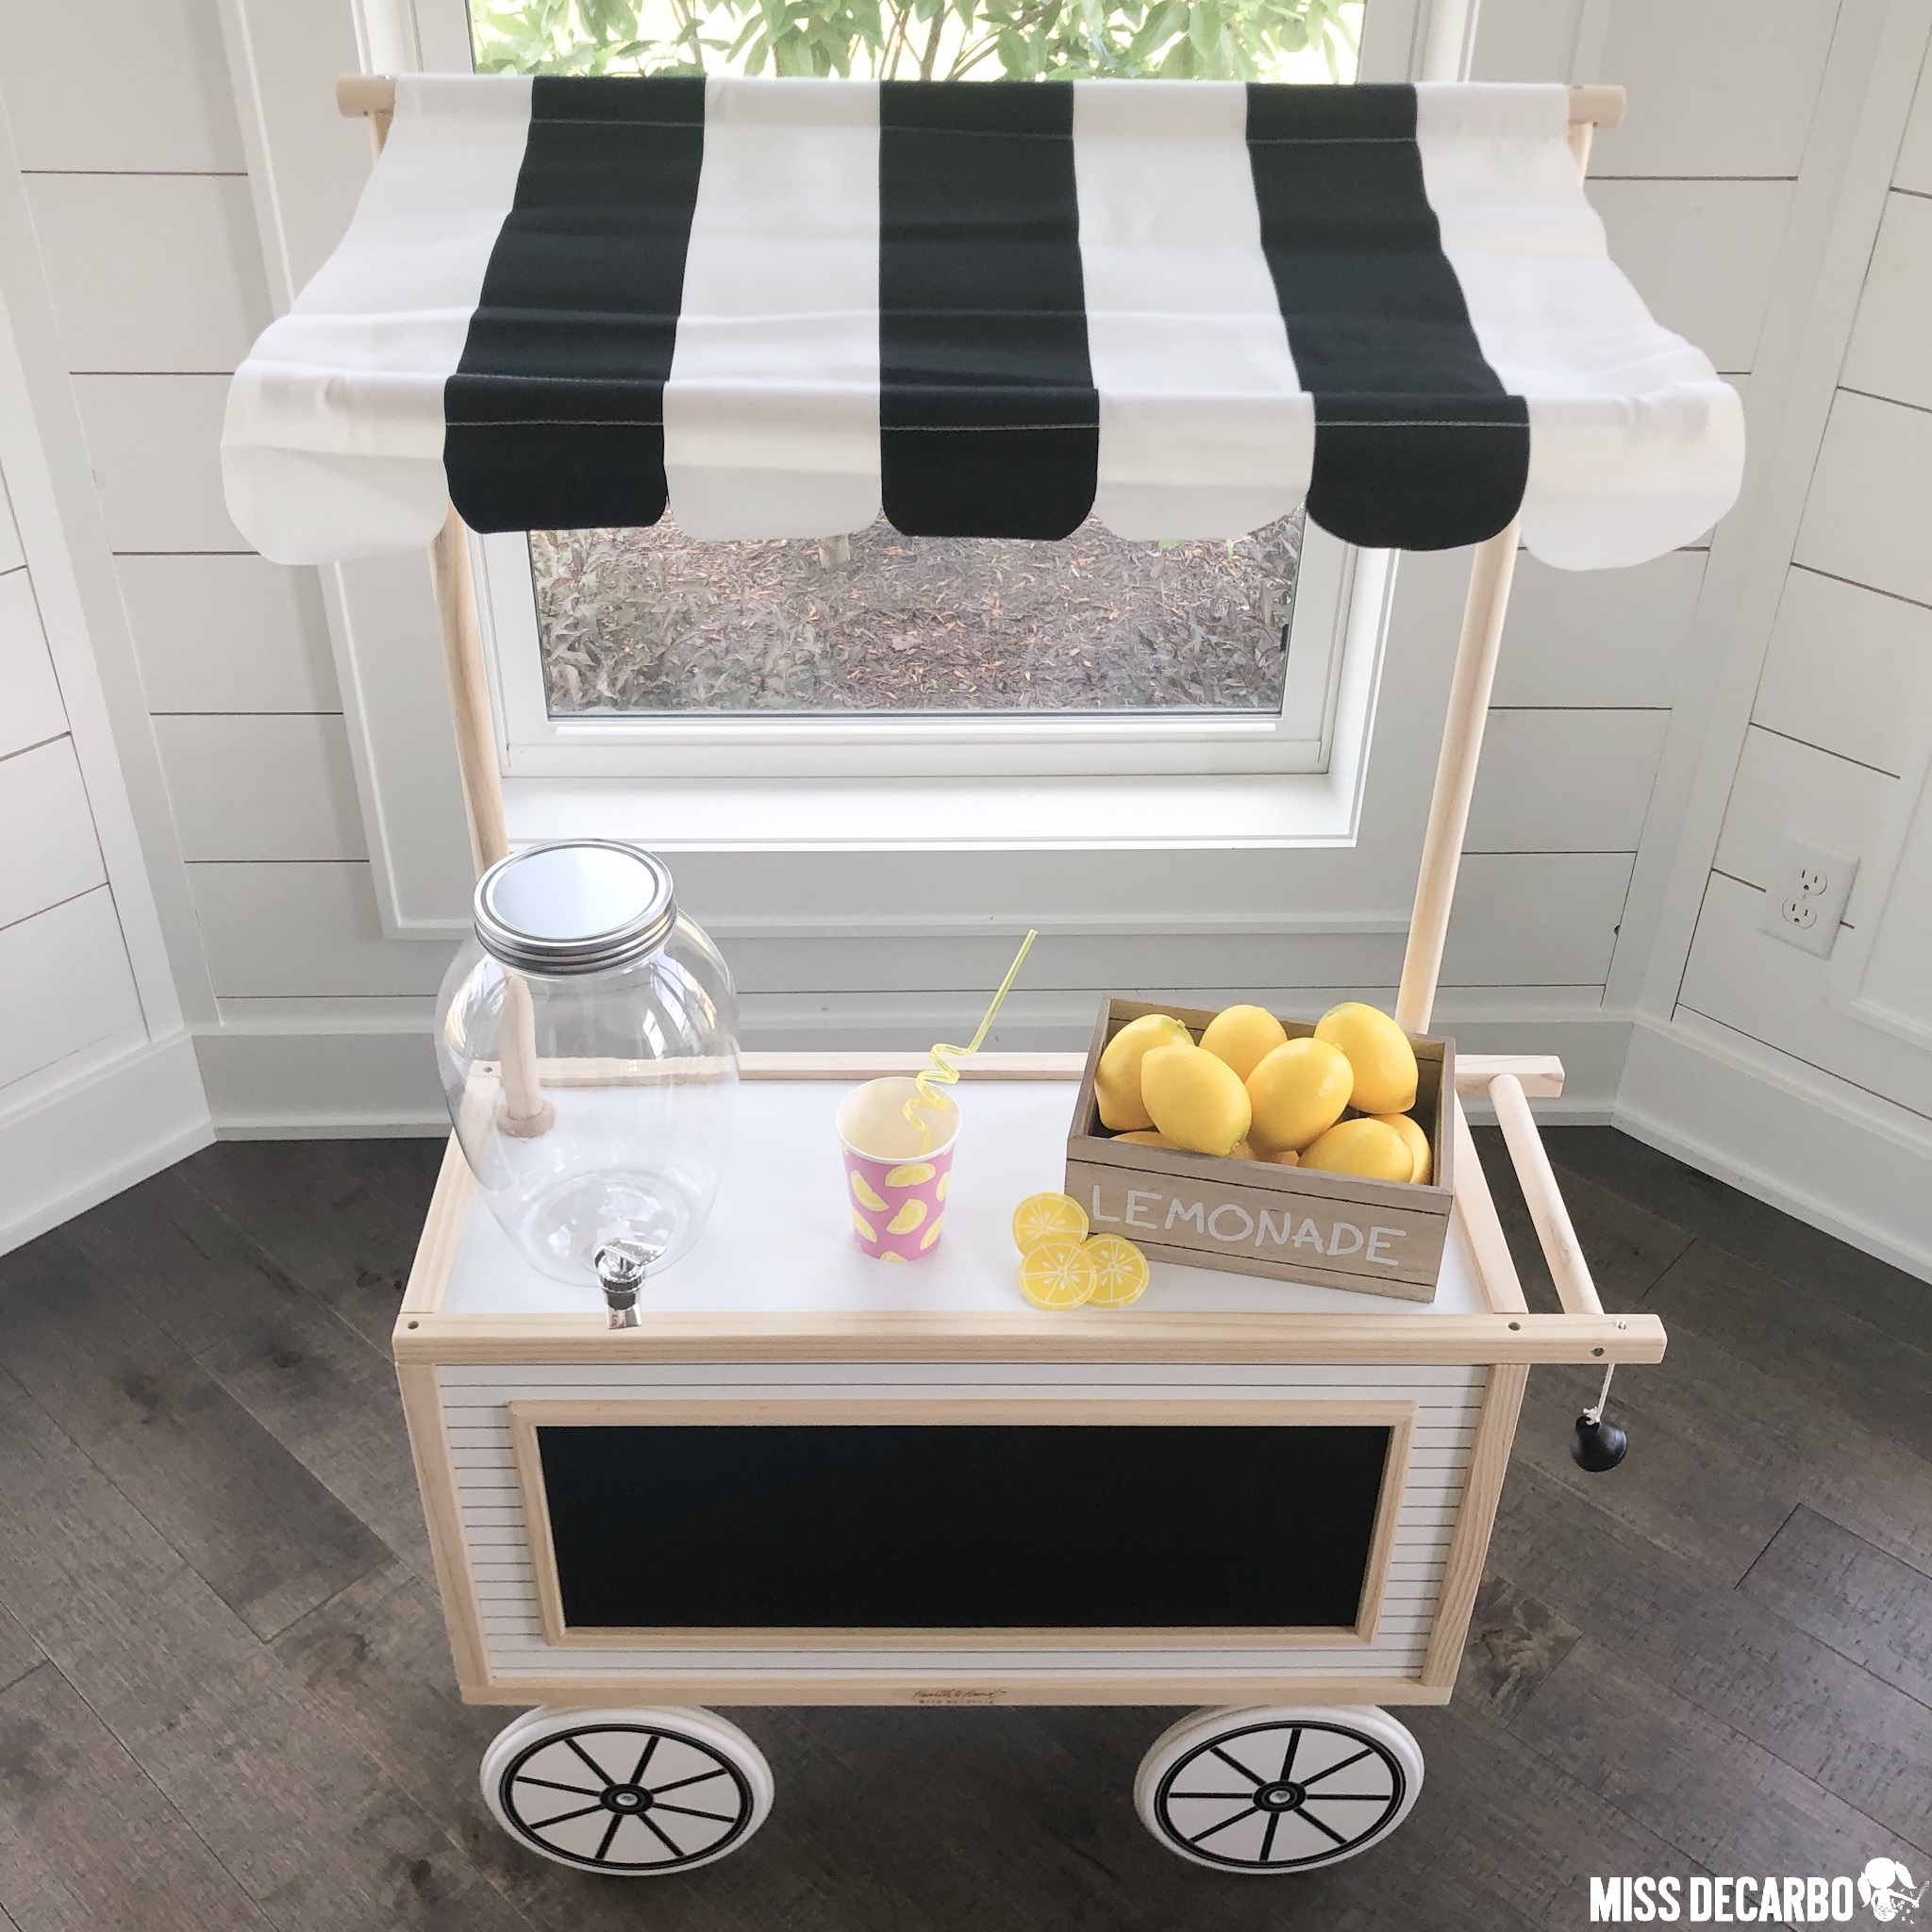 A modern farmhouse play cart that was transformed into a lemonade stand. This adorable dramatic play cart is perfect for fostering pretend-play and imagination!